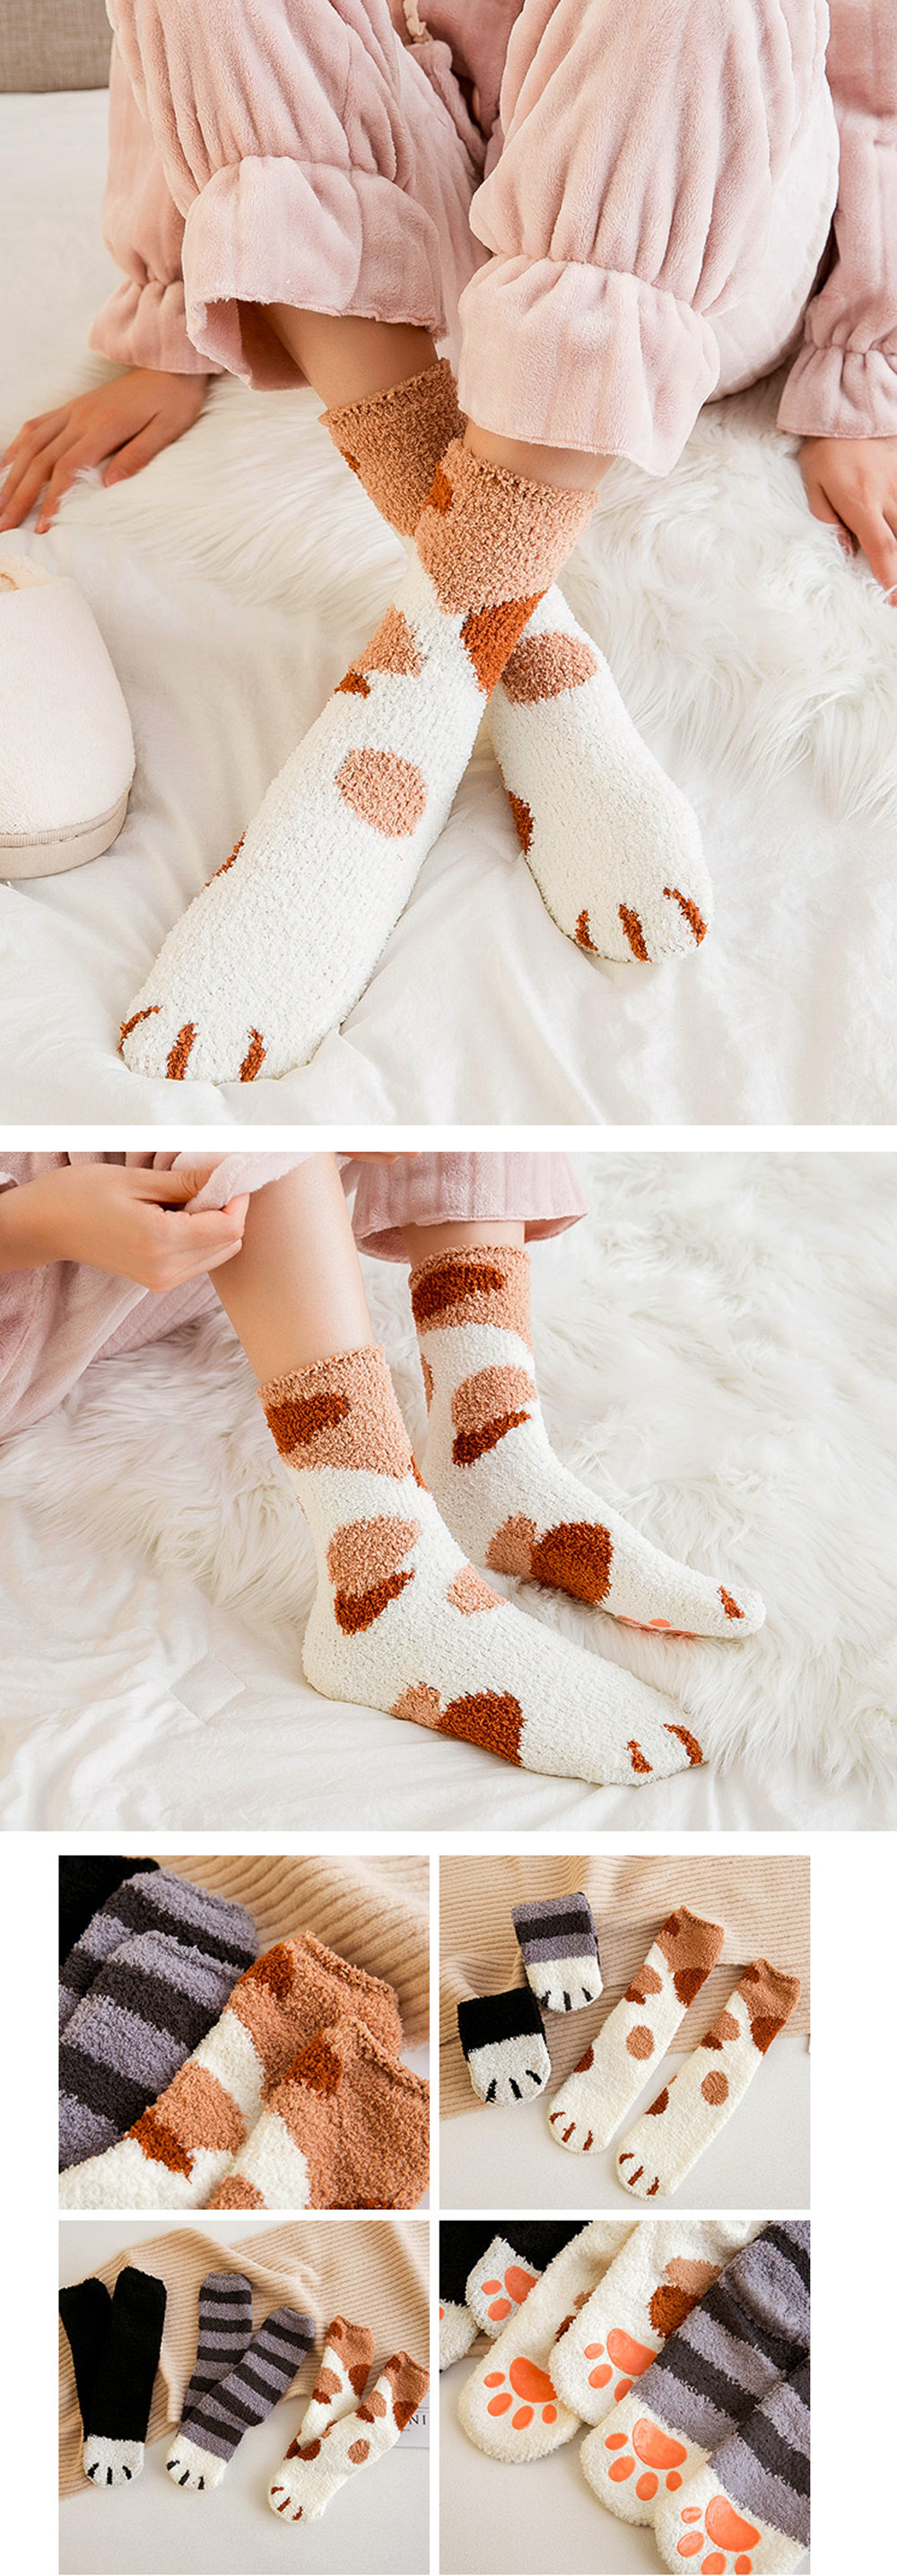 Cute Kitty Paw Socks - Set of 3 - 6 Patterns from Apollo Box